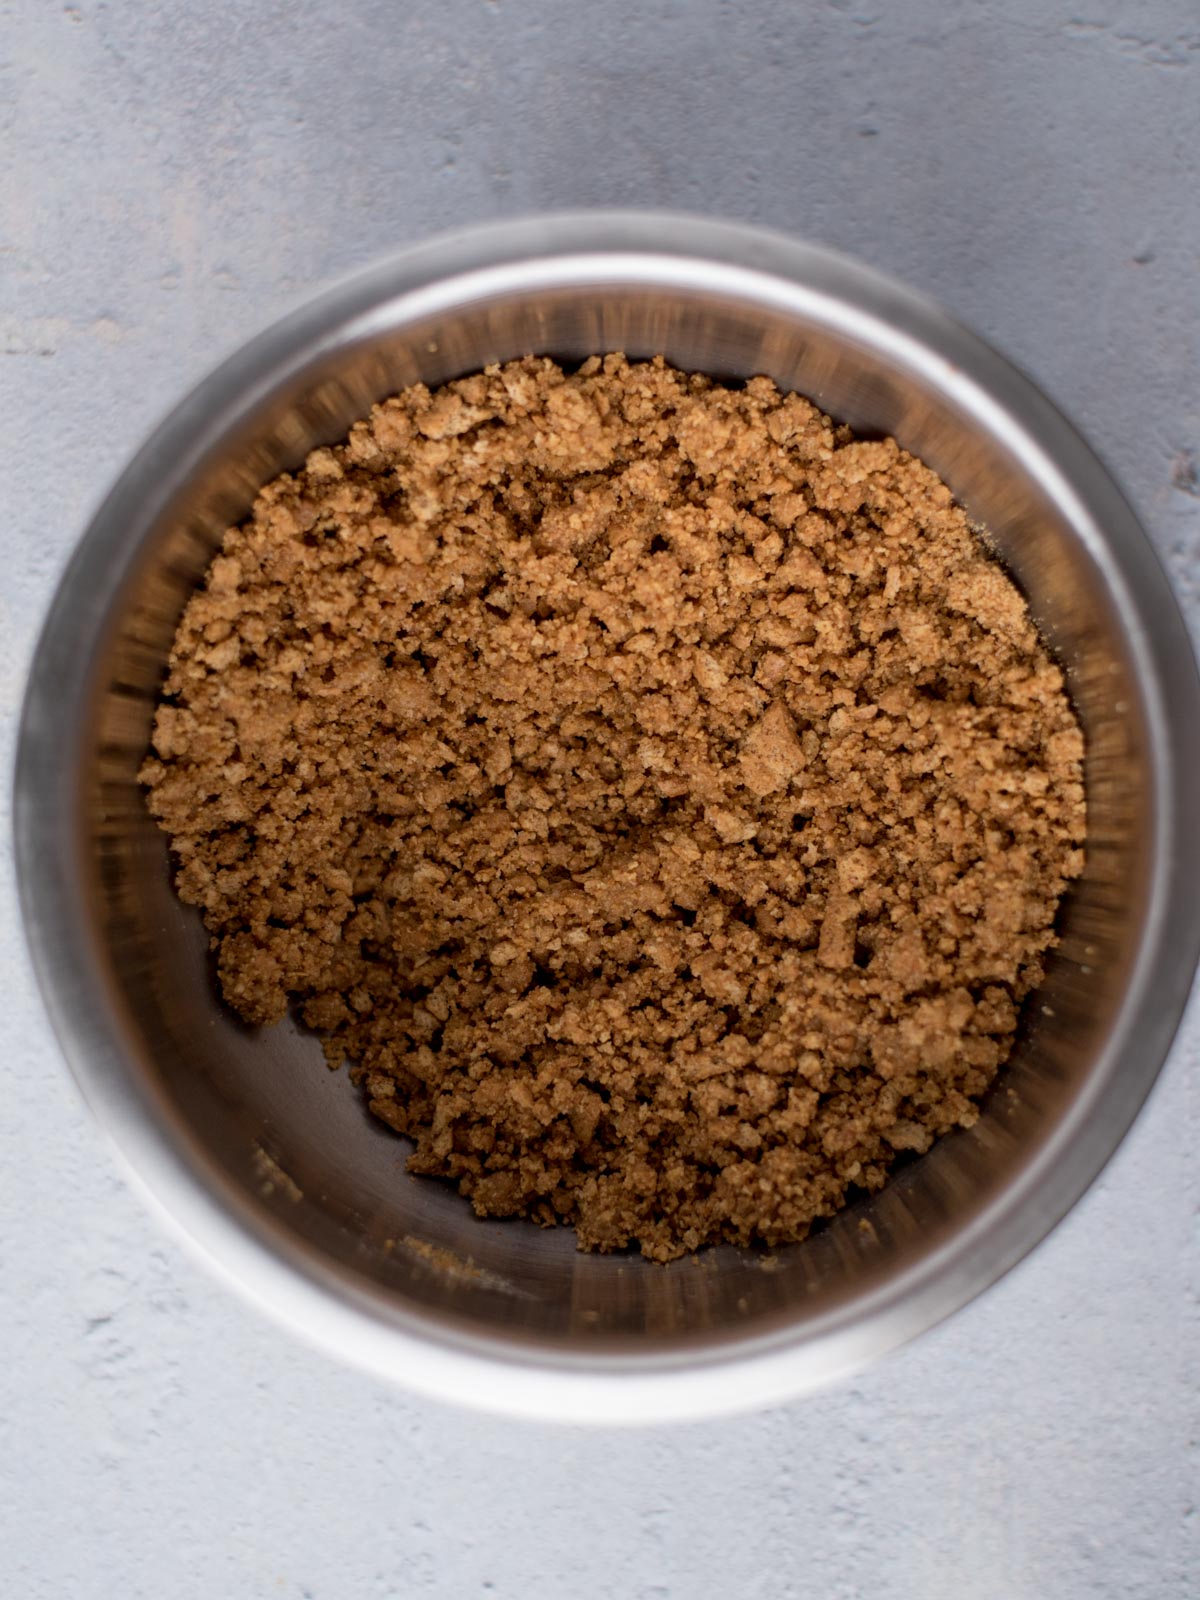 graham cracker crust ingredients mixed together in a bowl